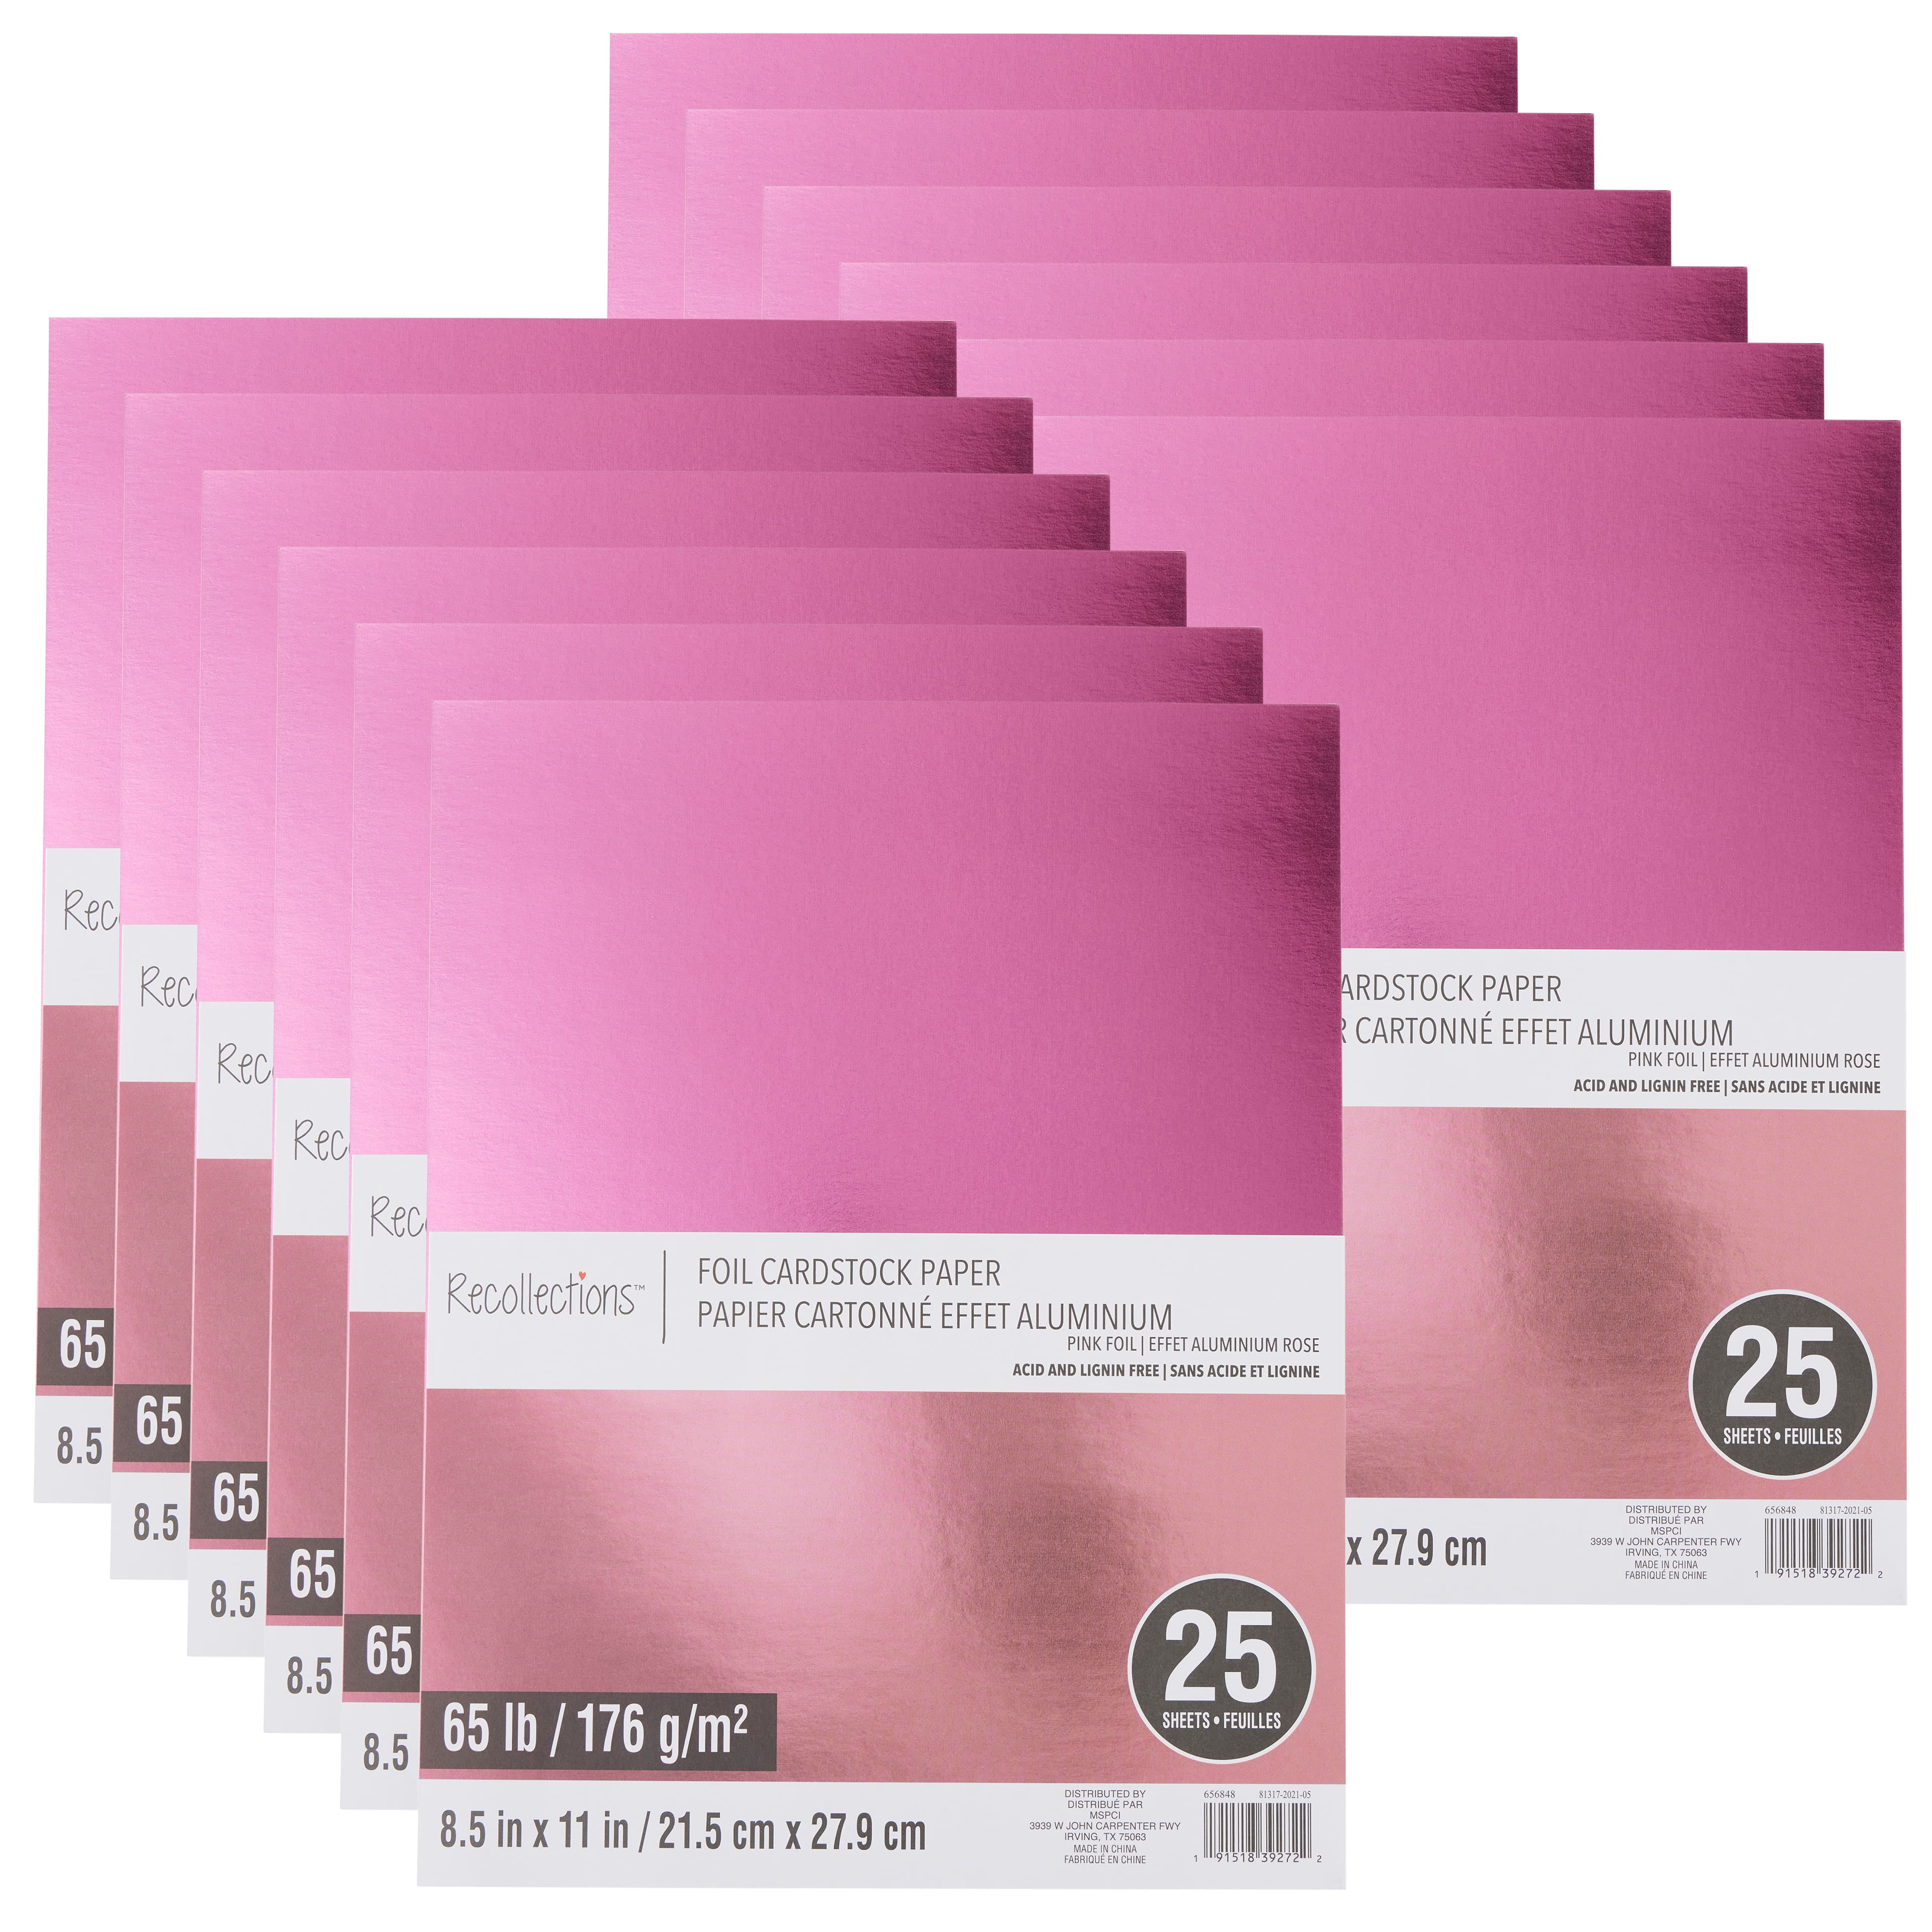 12 Packs: 25 ct. (300 total) 8.5 x 11 Foil Cardstock Paper by  Recollections™